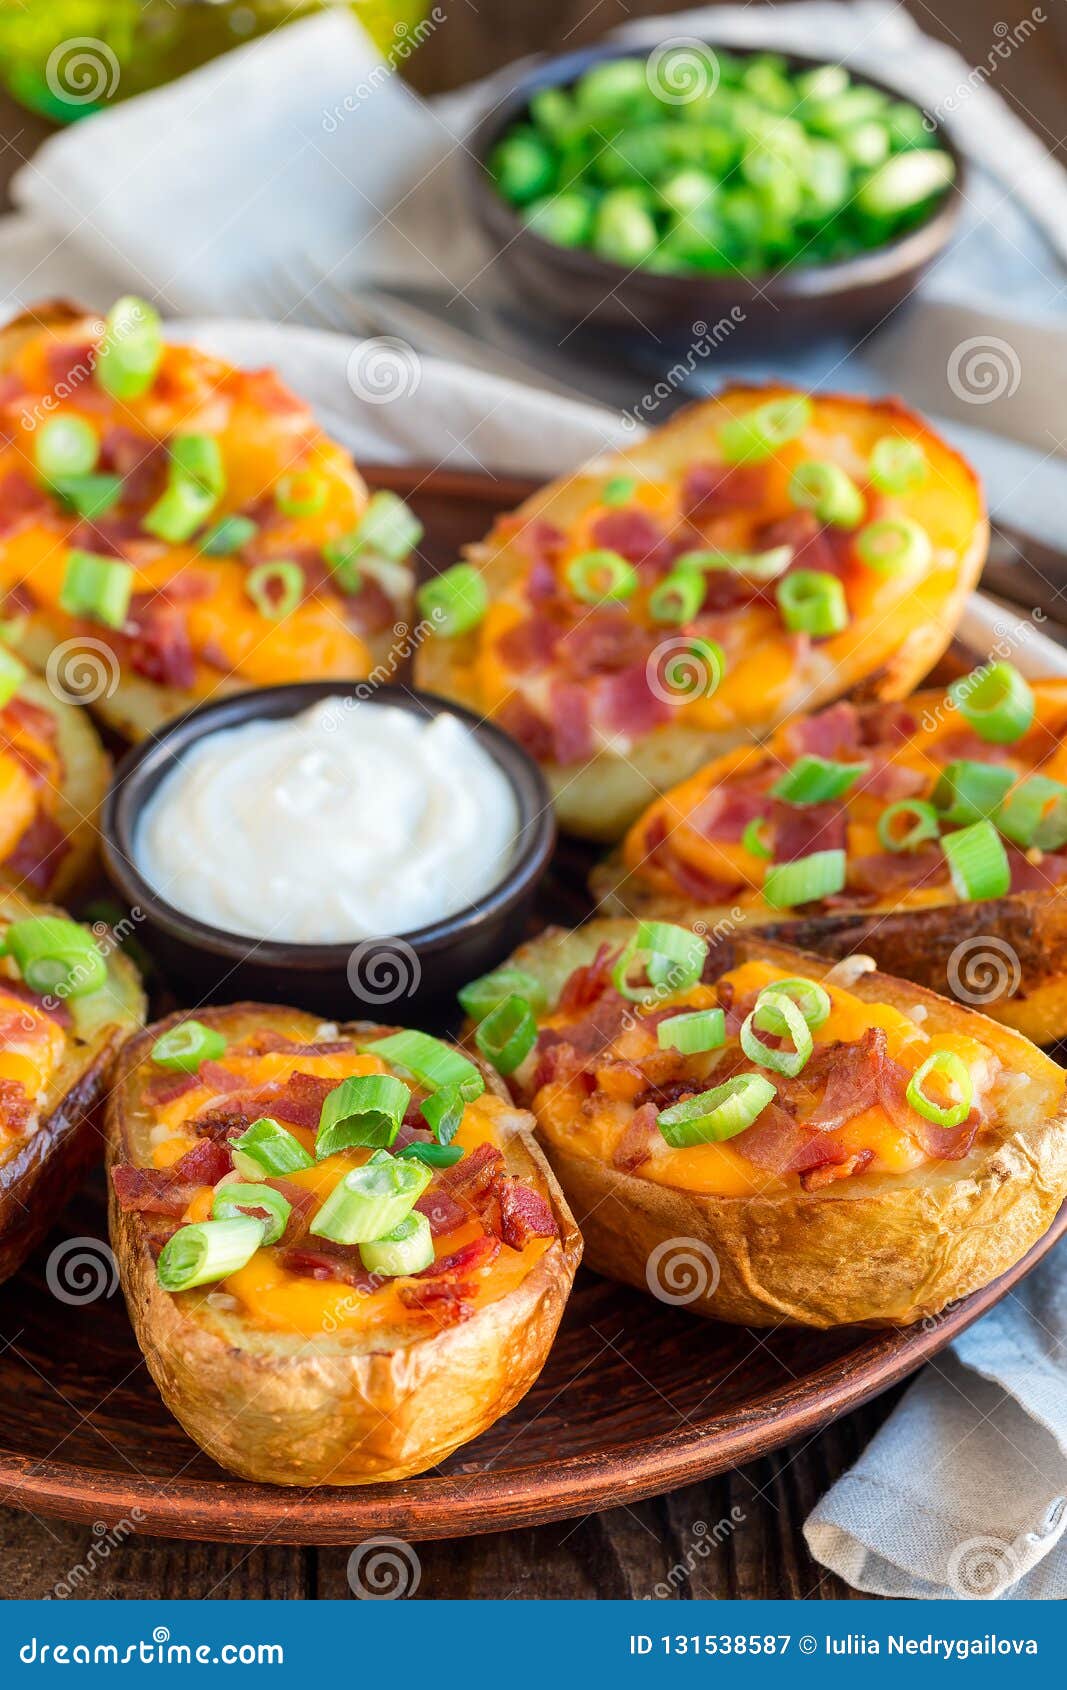 baked loaded potato skins with cheddar cheese and bacon garnished with scallions and sour cream, vertical